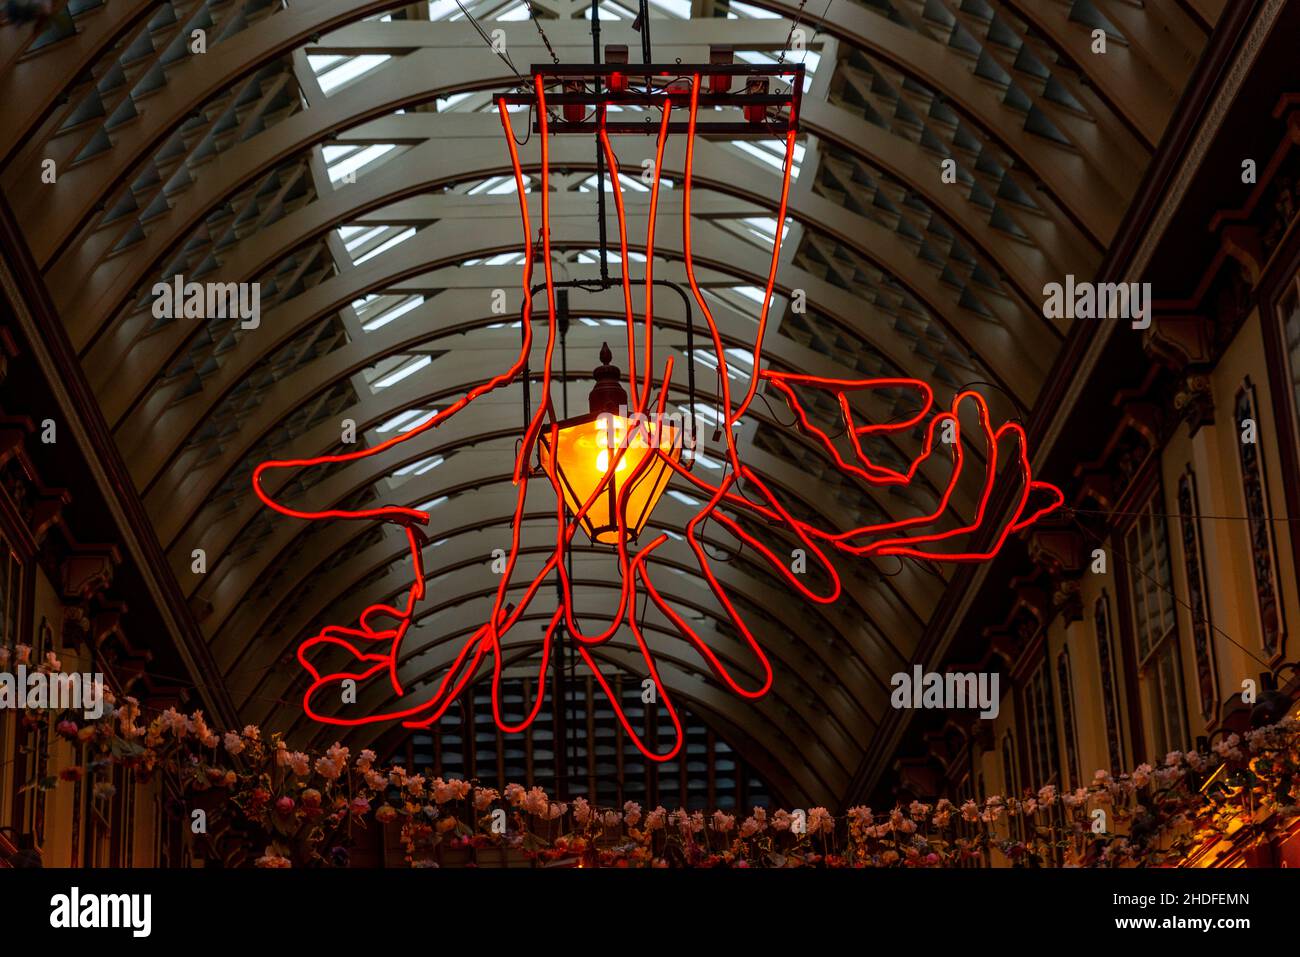 Leadenhall market ceiling with The Source by Patrick Tuttofuoco, neon hands showing sign language, The City, London Stock Photo